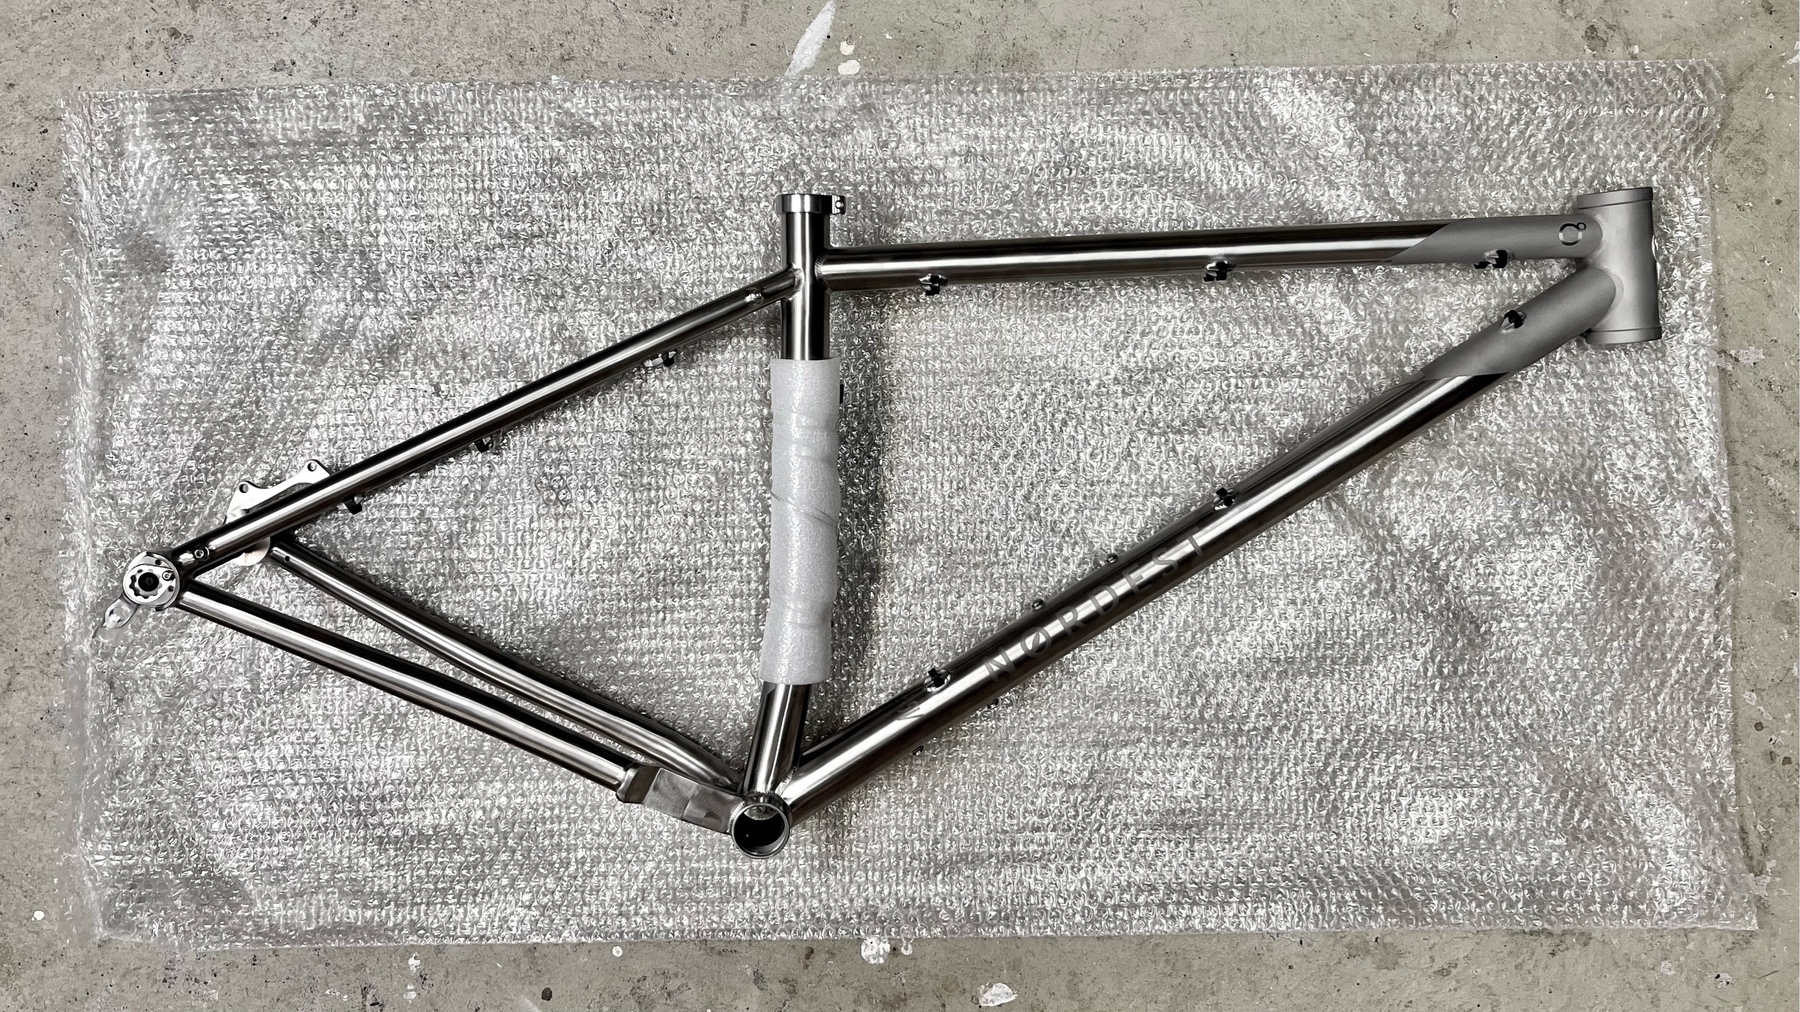 Brushed titanium mountain bike frame laying drive side up on a layer of bubble wrap on the ground. The seat tube is wrapped in a bit of cushioning plastic to hold the rear axle, which is presently out of view.